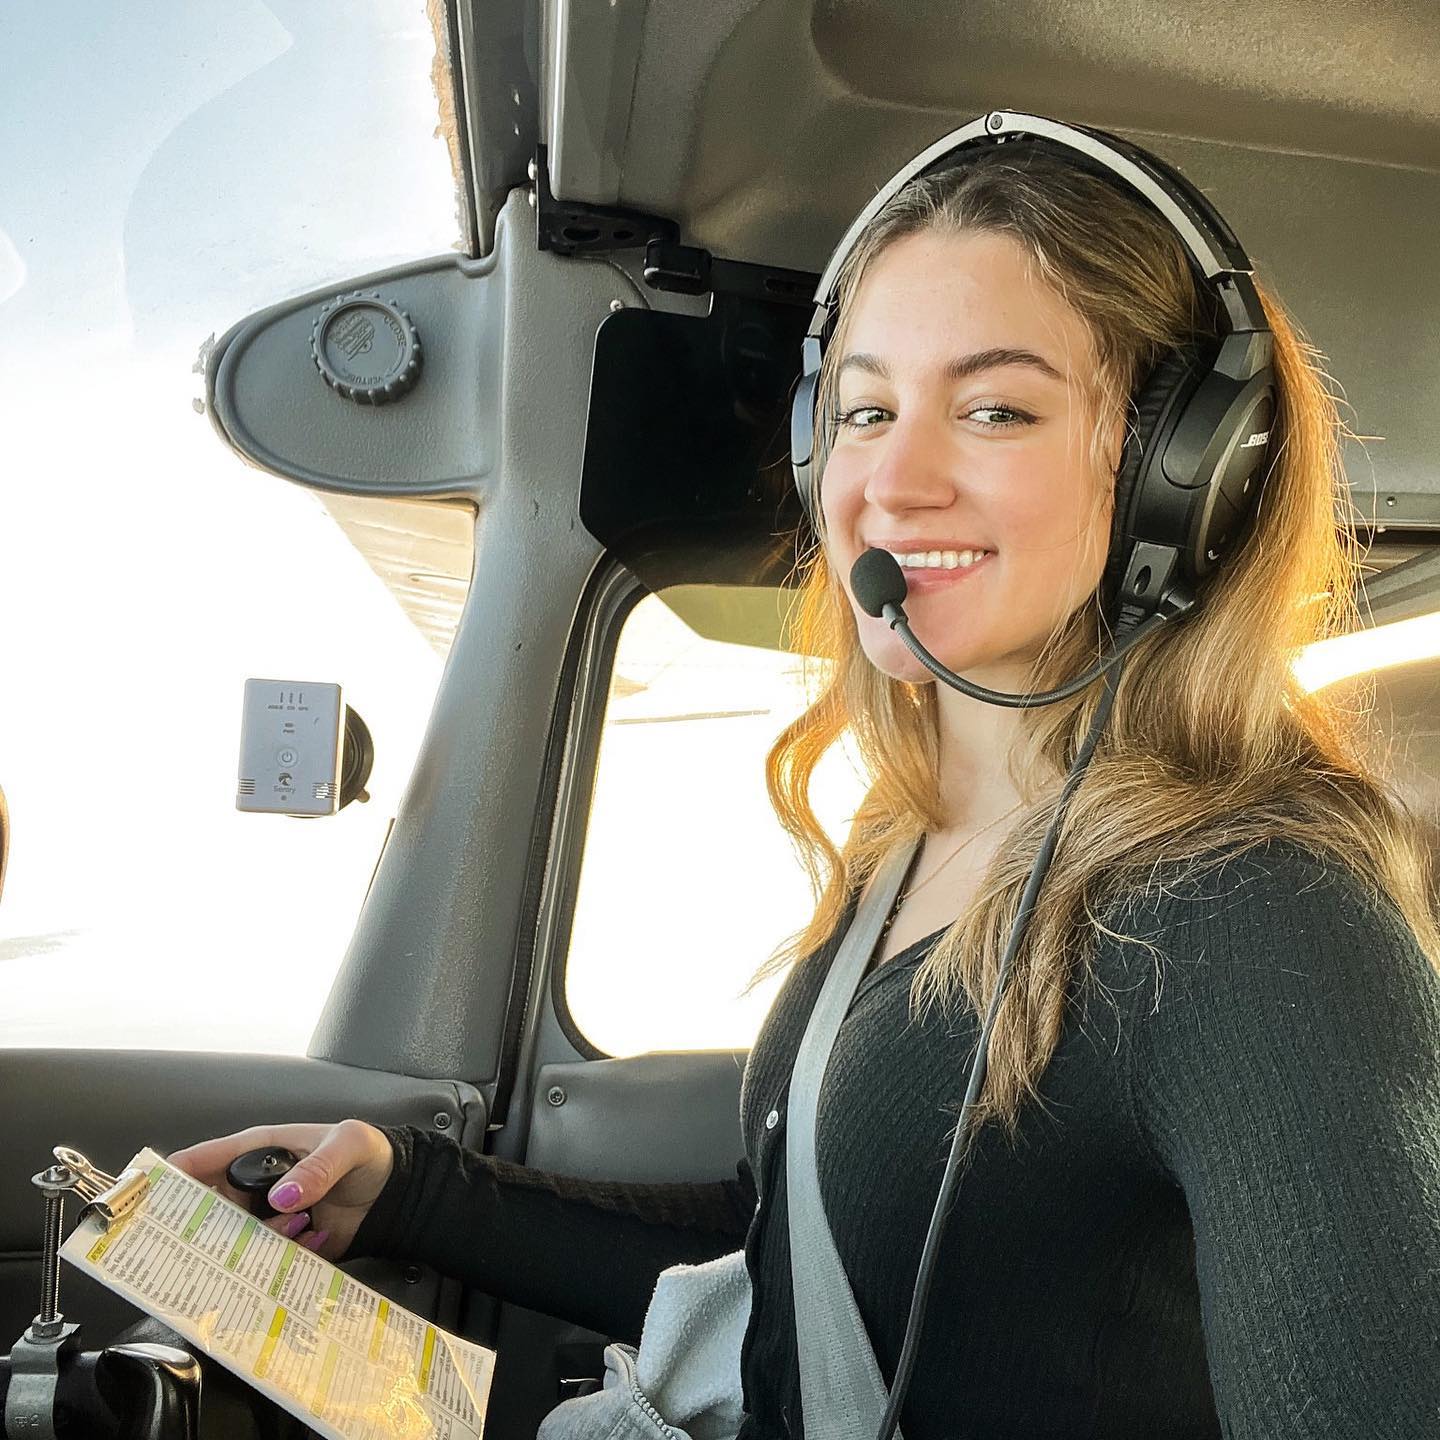 22-year-old pilot shares how she deals with sexist and ageist comments from  people saying she's 'too young